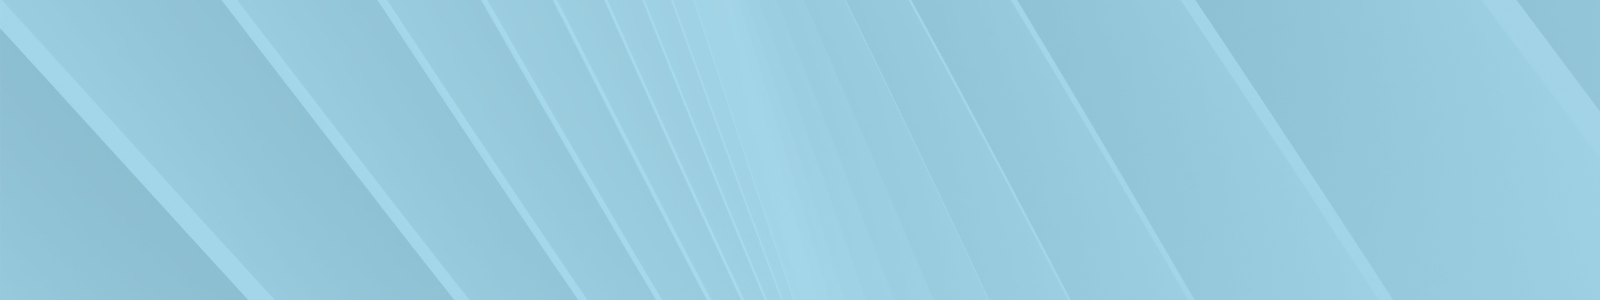 decorative light blue background with angled vertical lines Ideas. Evidence. Impact.